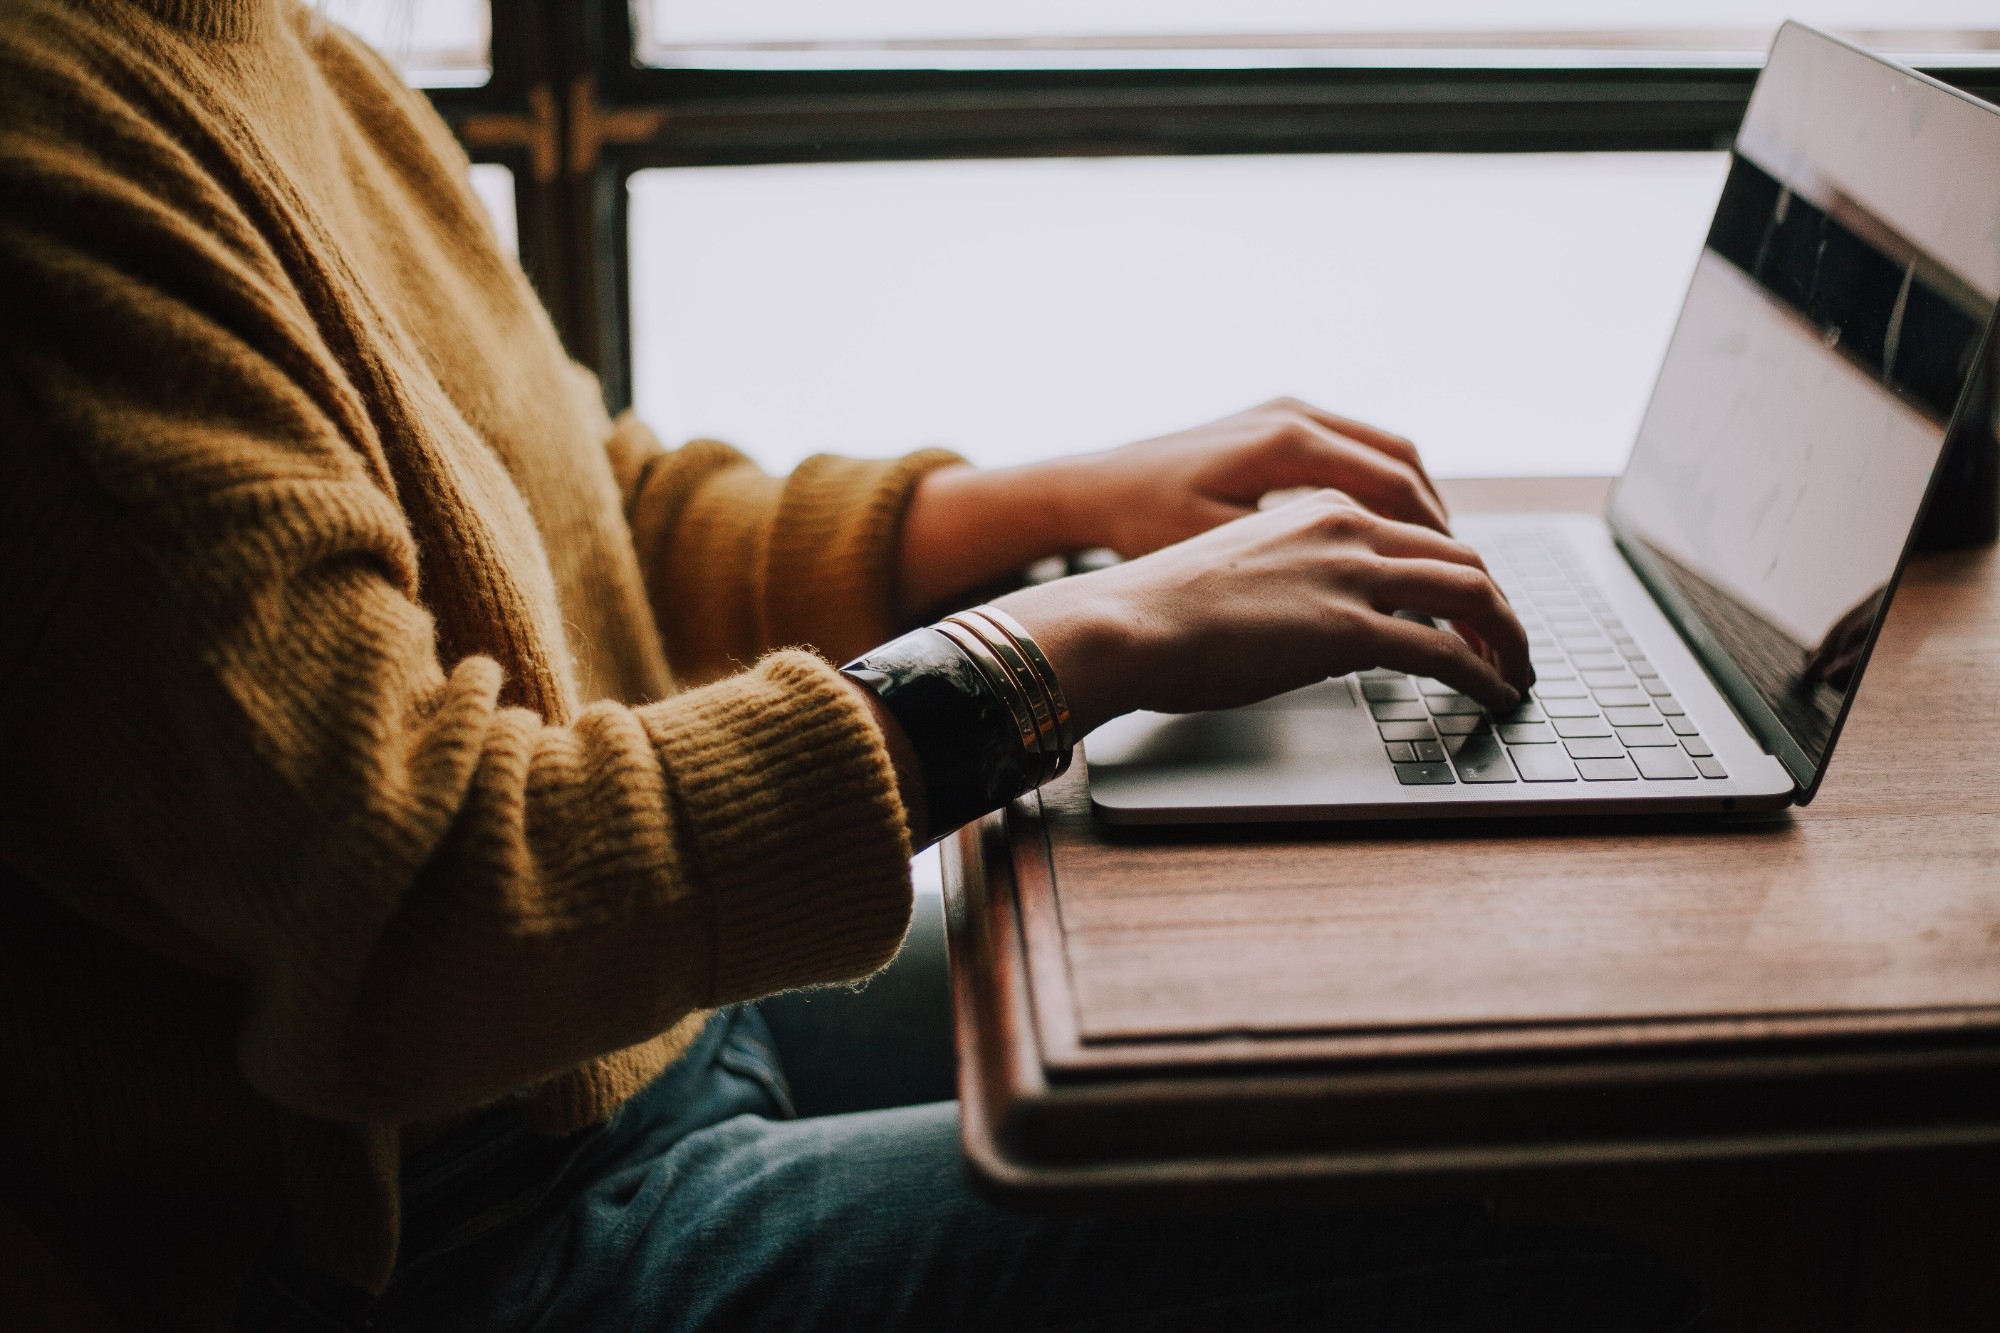 A person in a yellow sweater types on a laptop.